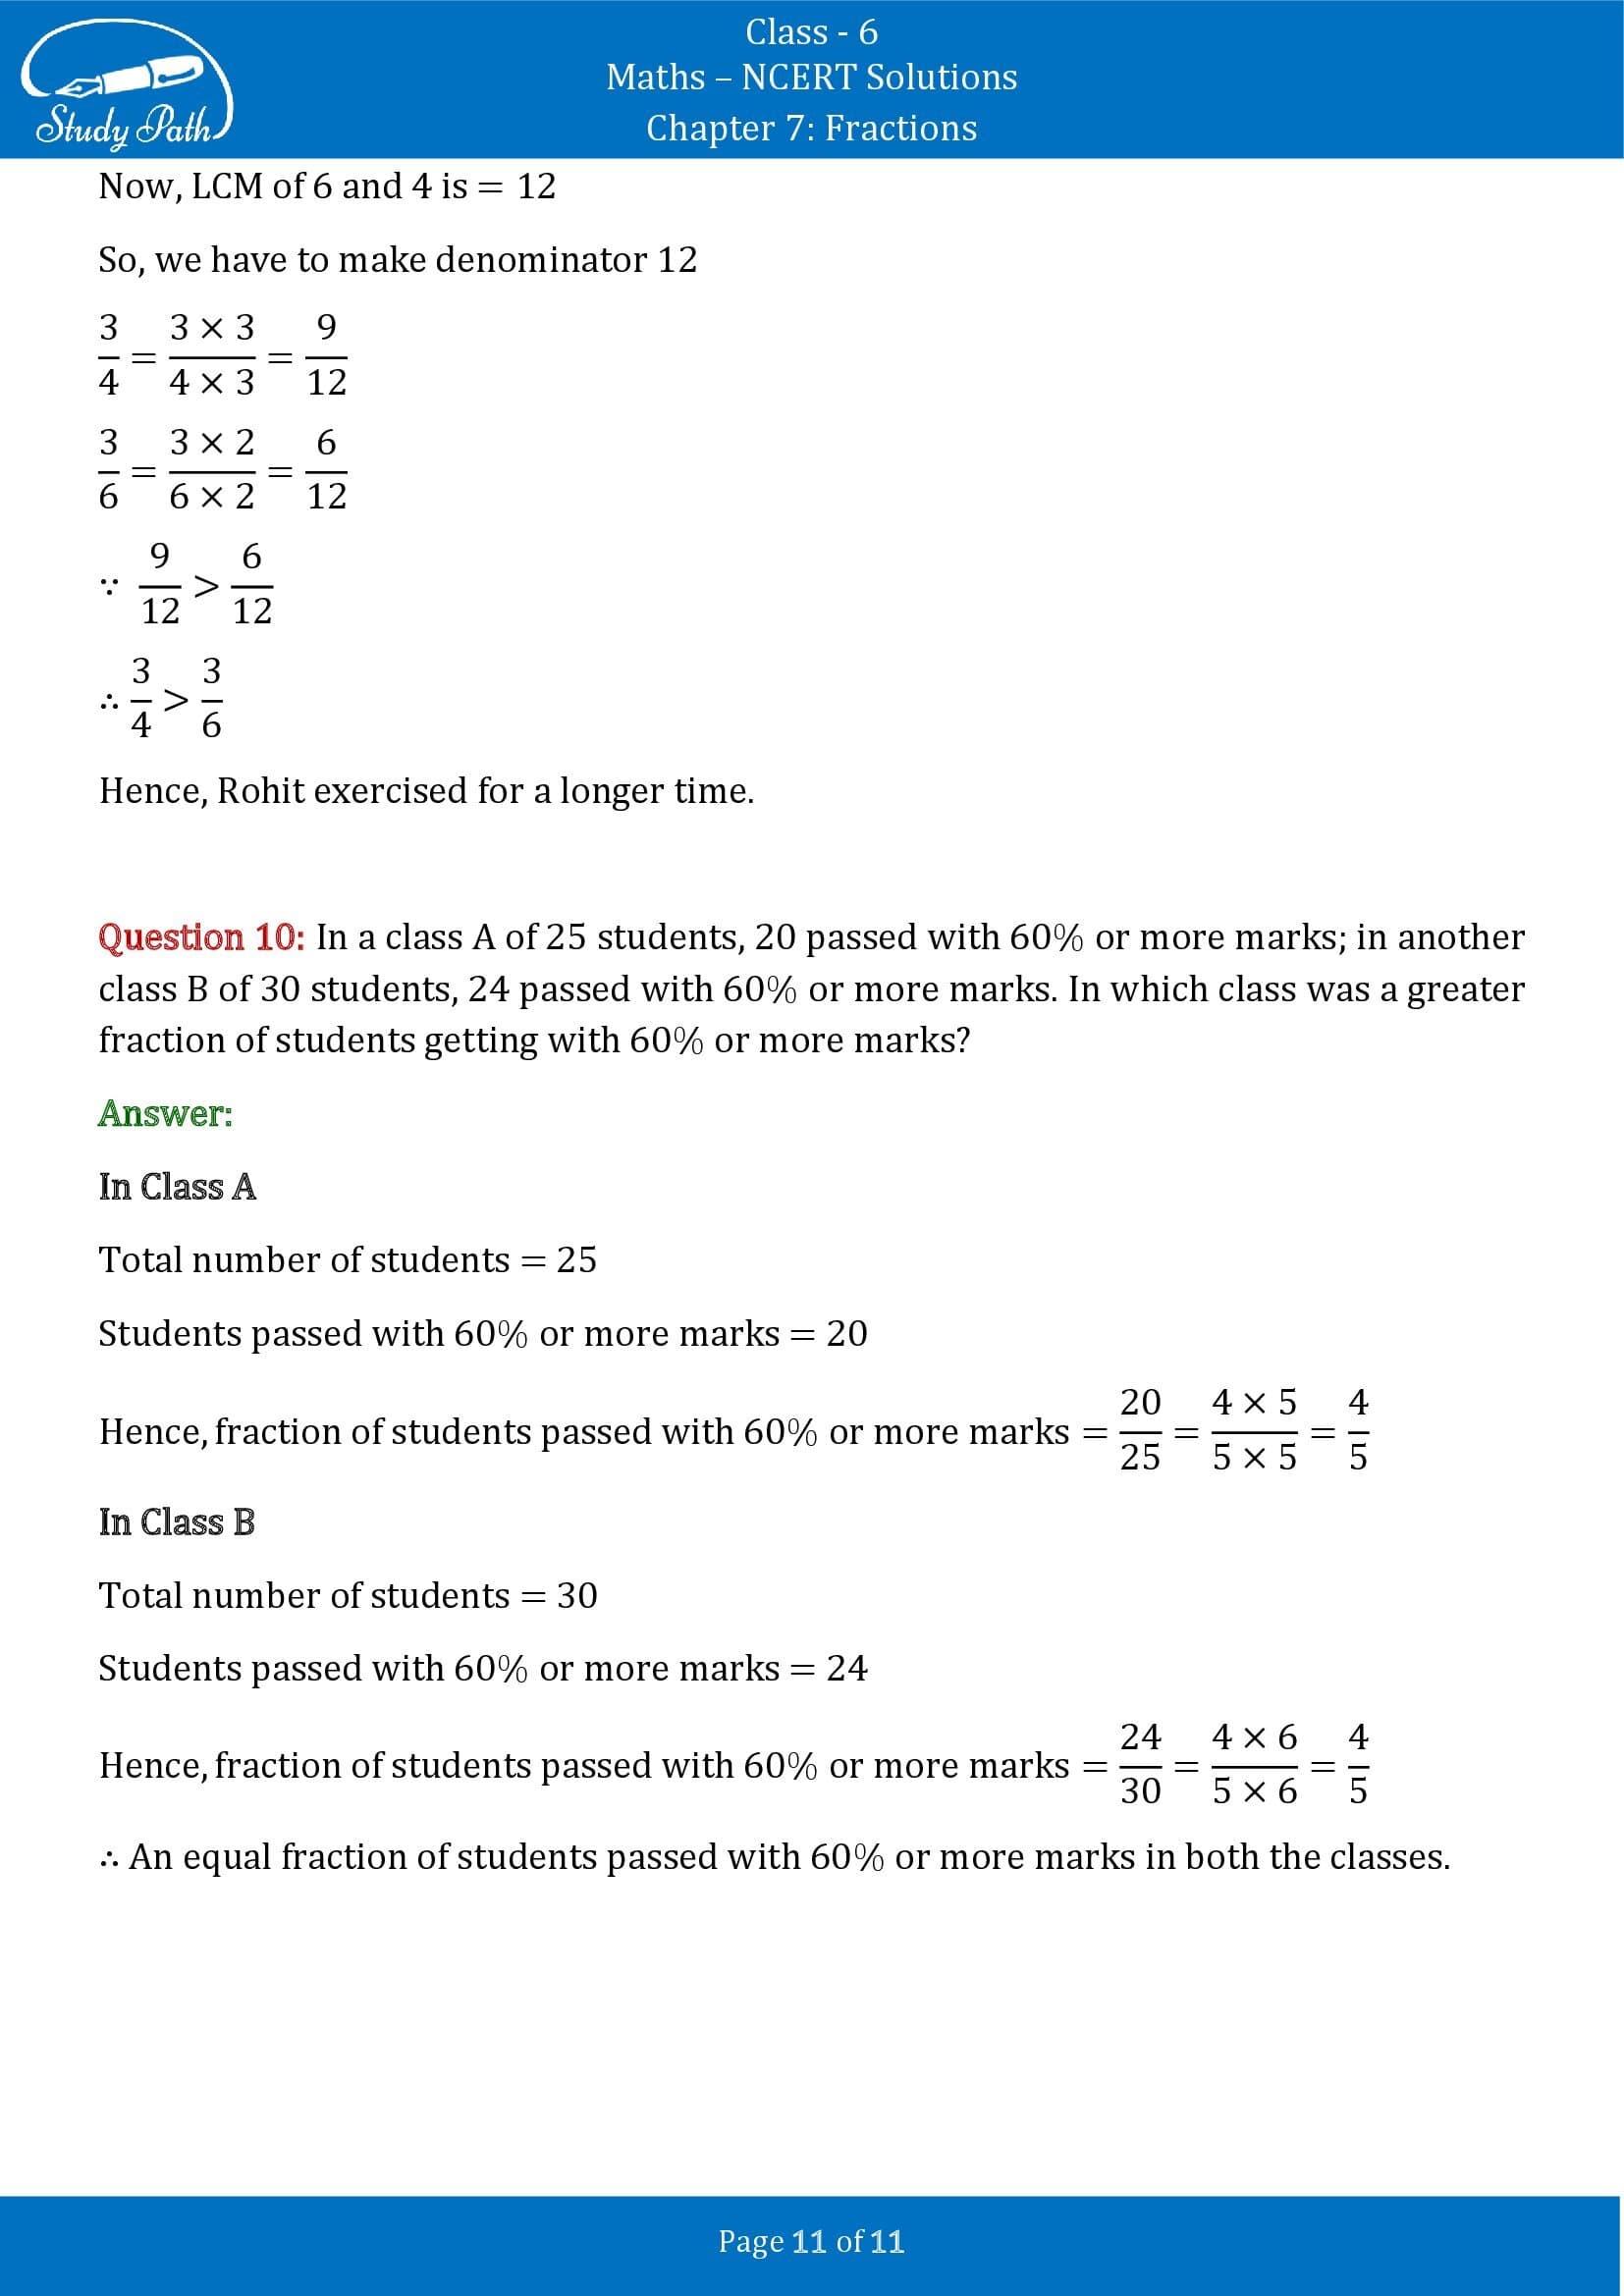 NCERT Solutions for Class 6 Maths Chapter 7 Fractions Exercise 7.4 00011